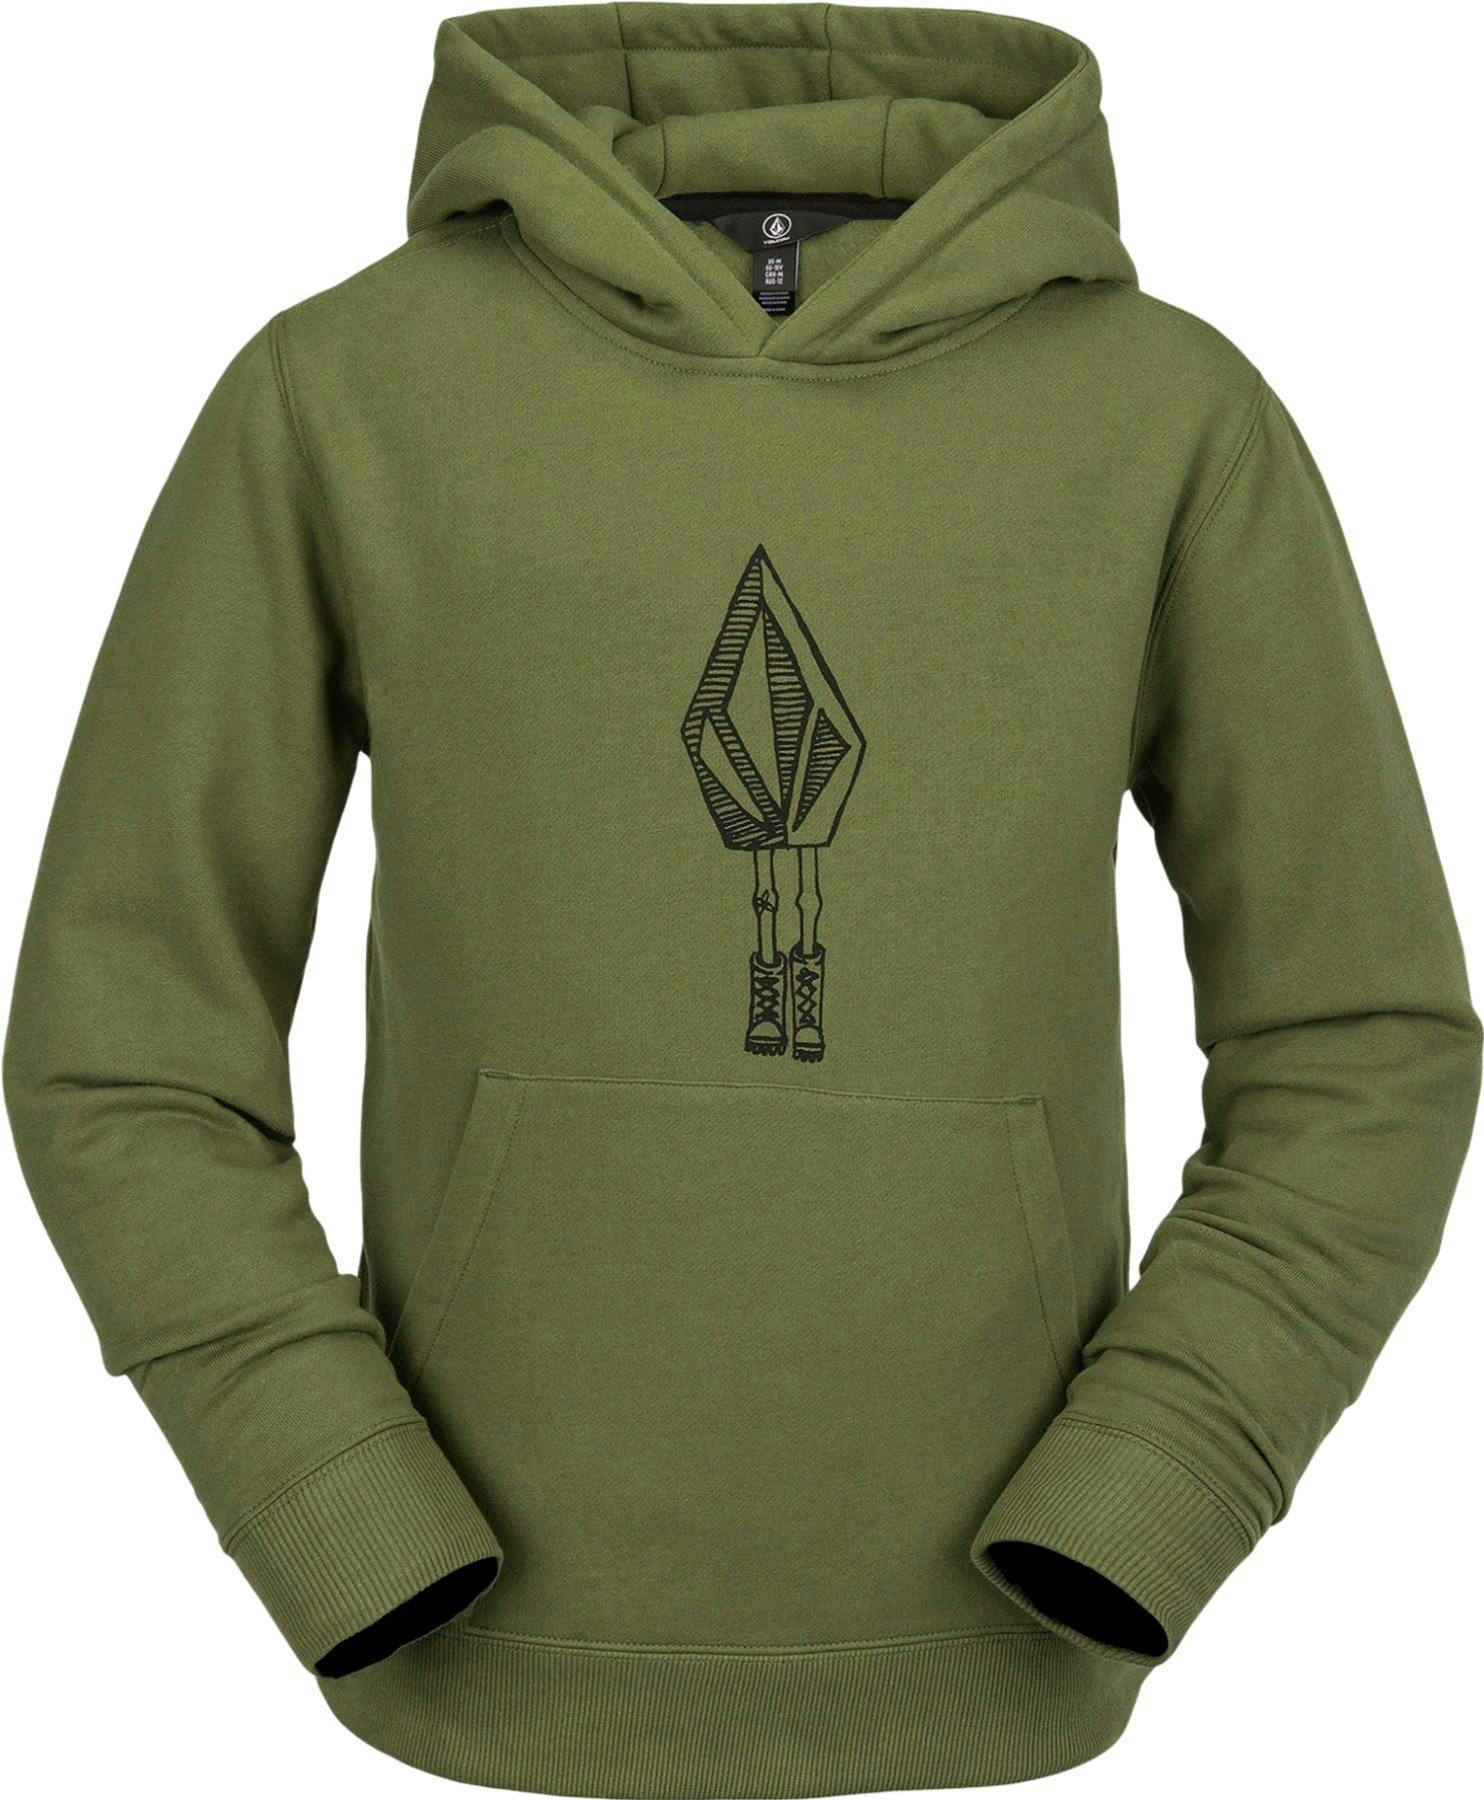 Product image for Hotlapper Hoodie - Kids